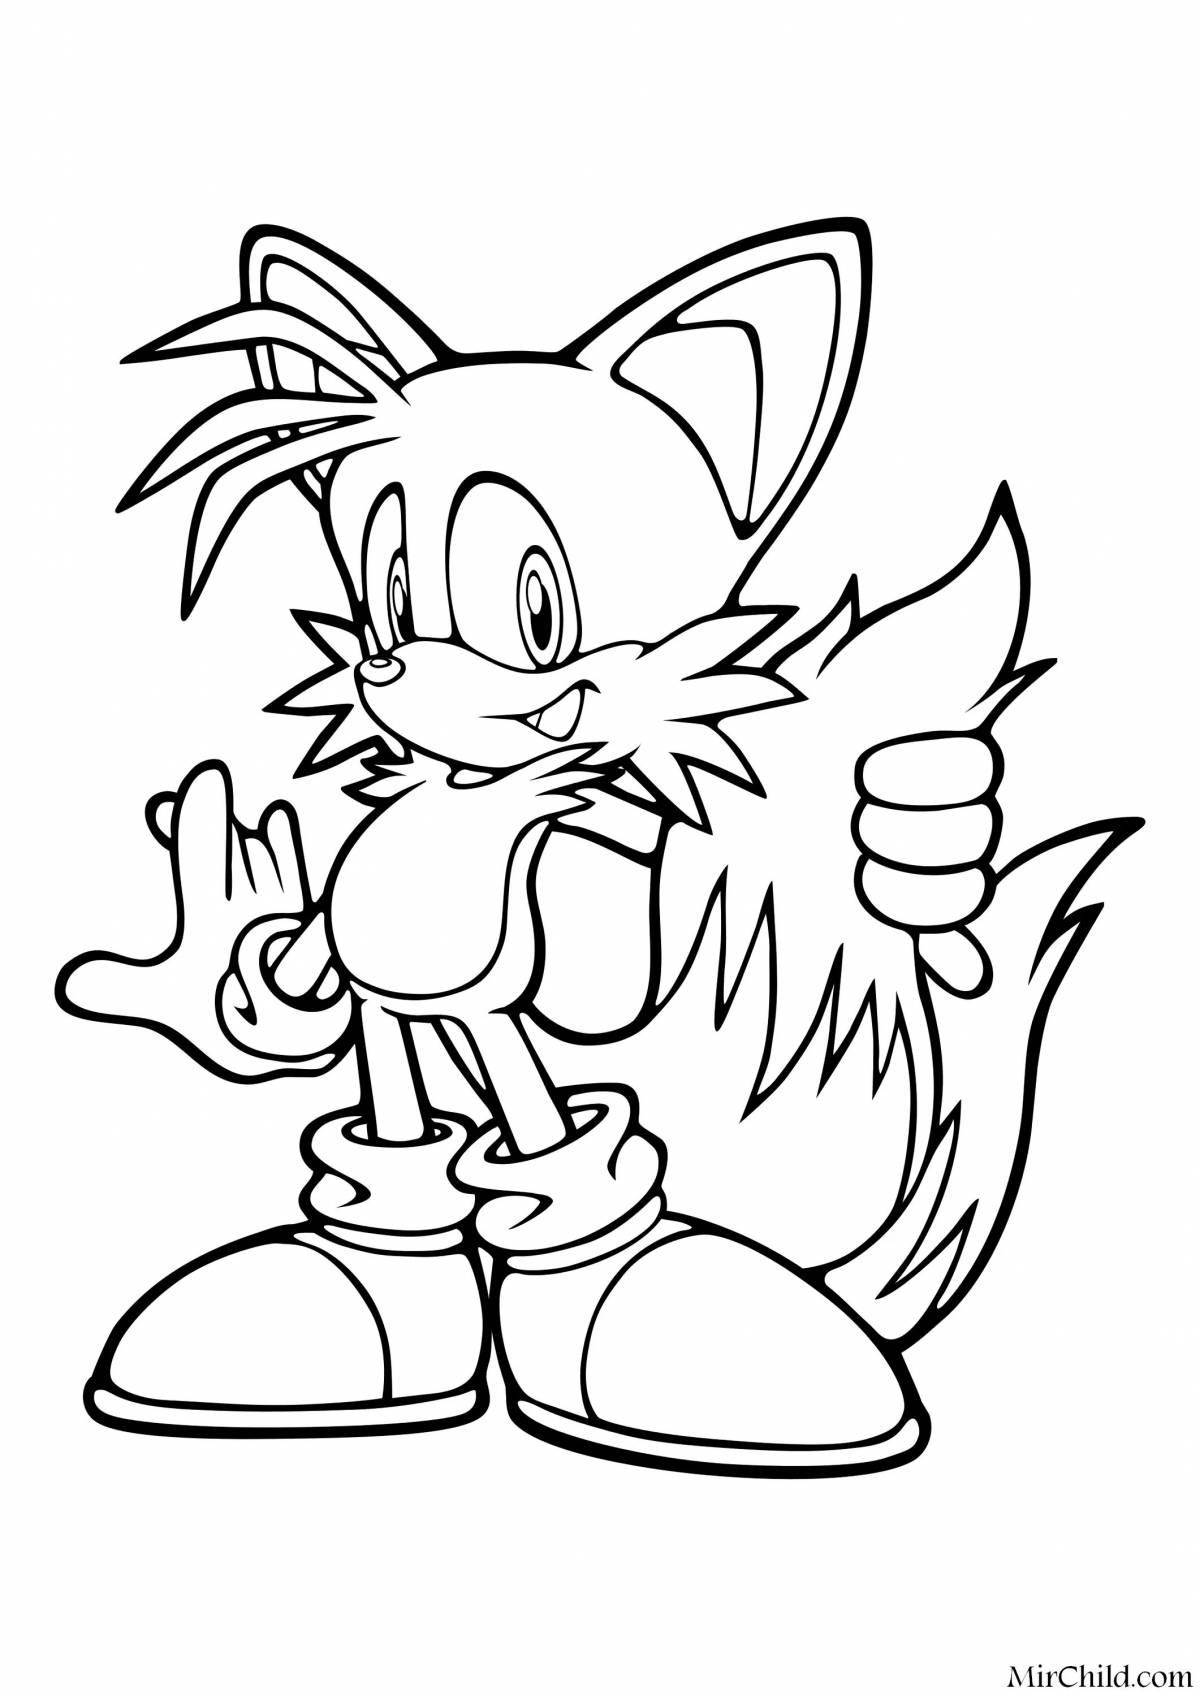 Lovely sonic all heroes coloring book